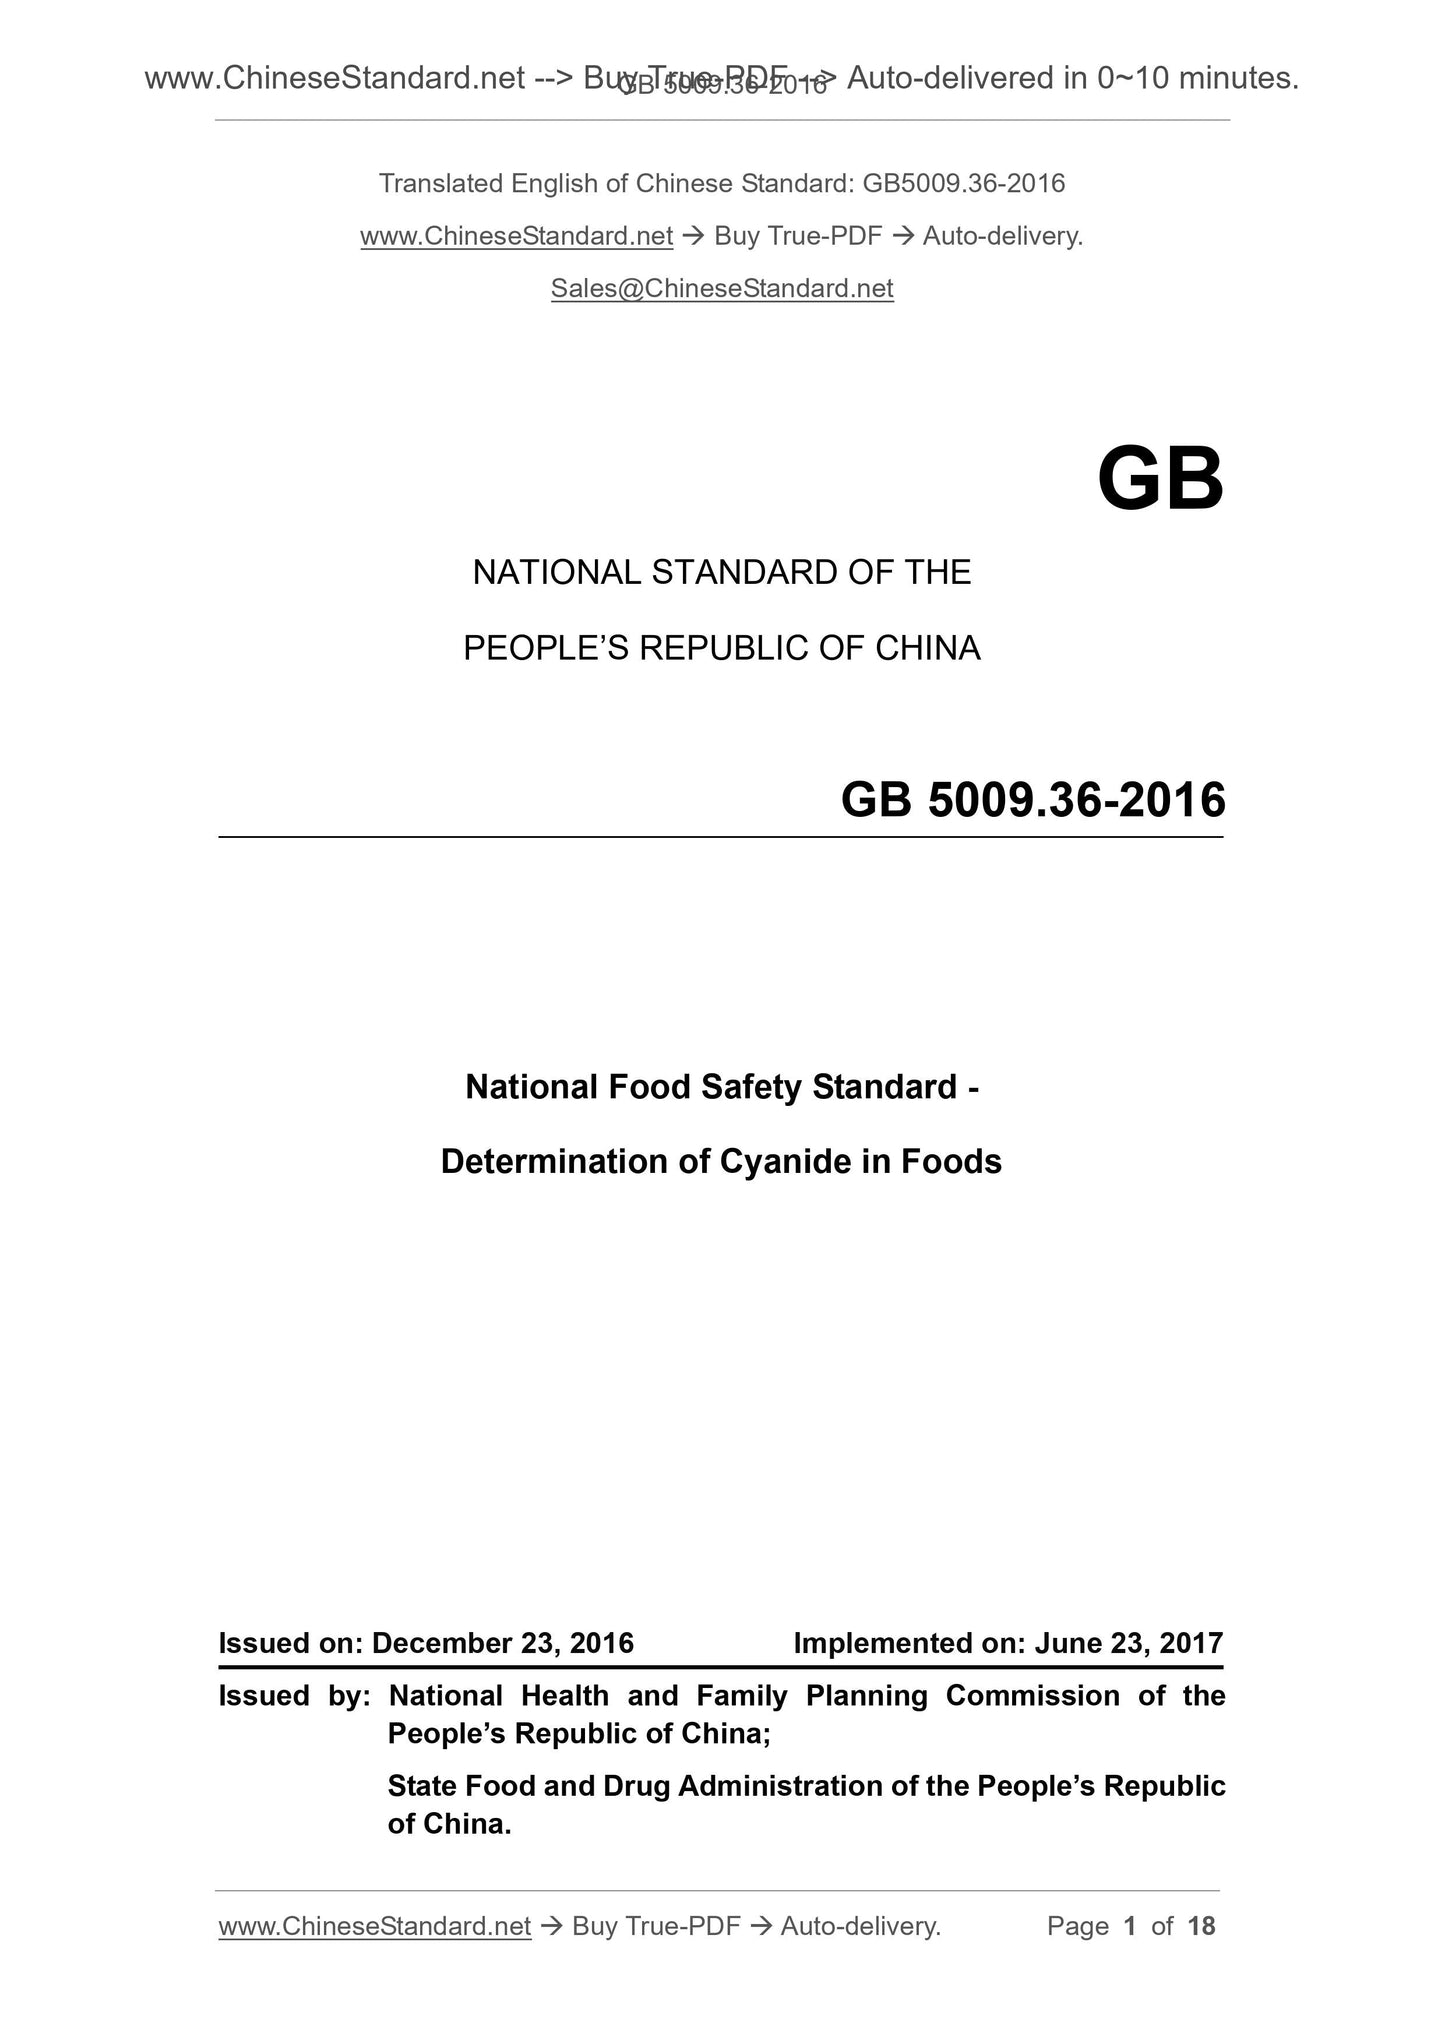 GB 5009.36-2016 Page 1